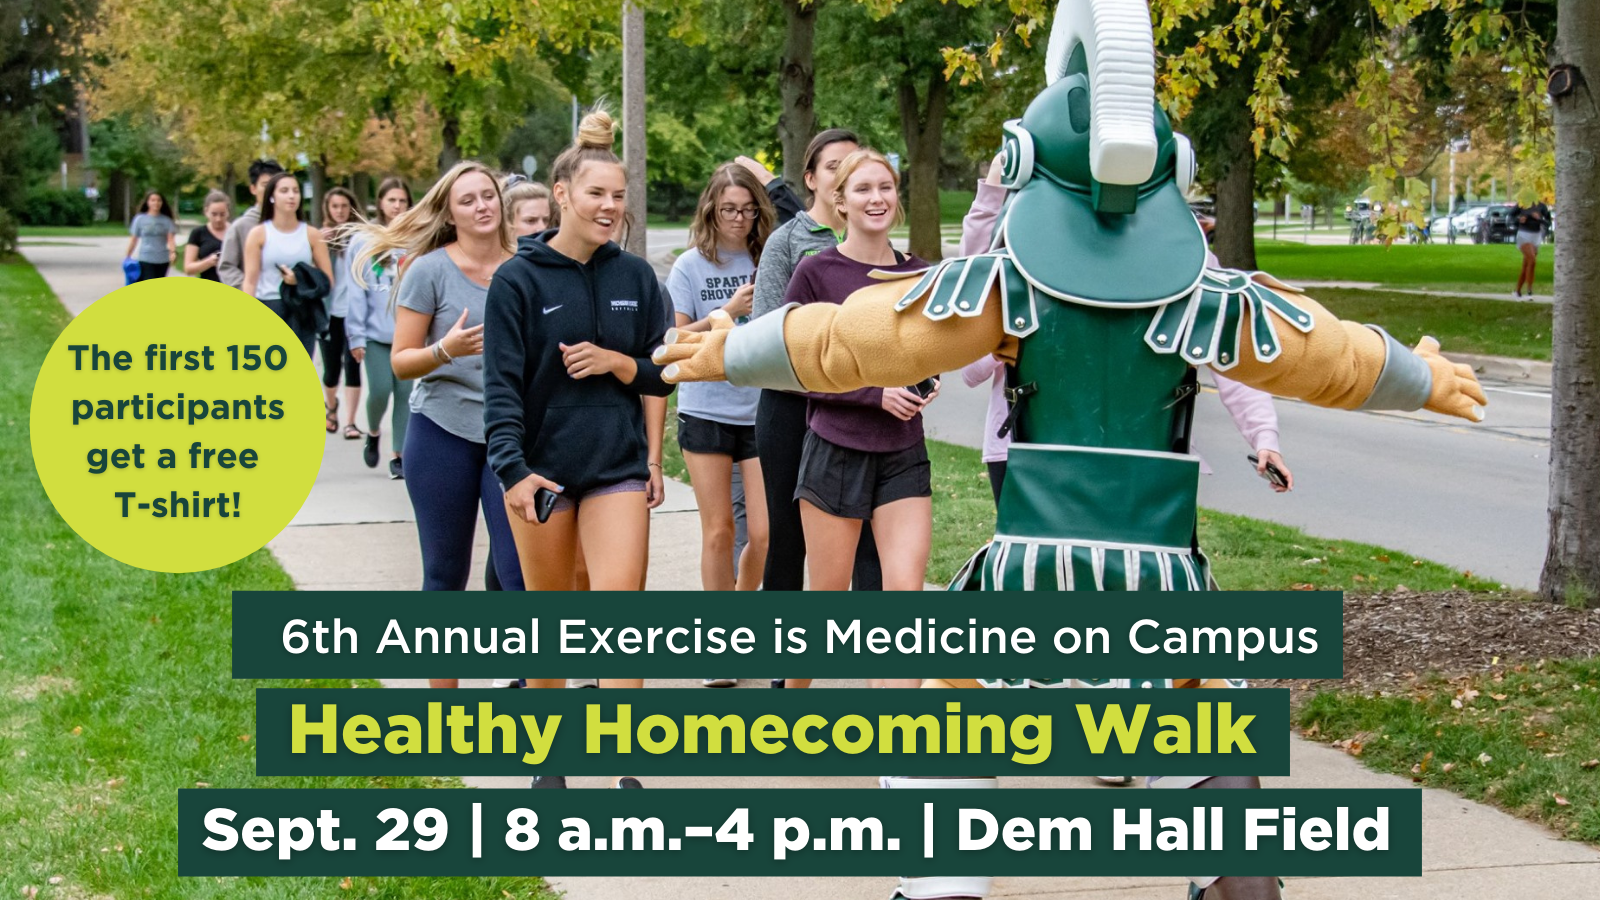 Students and Sparty participating in the Healthy Homecoming Walk